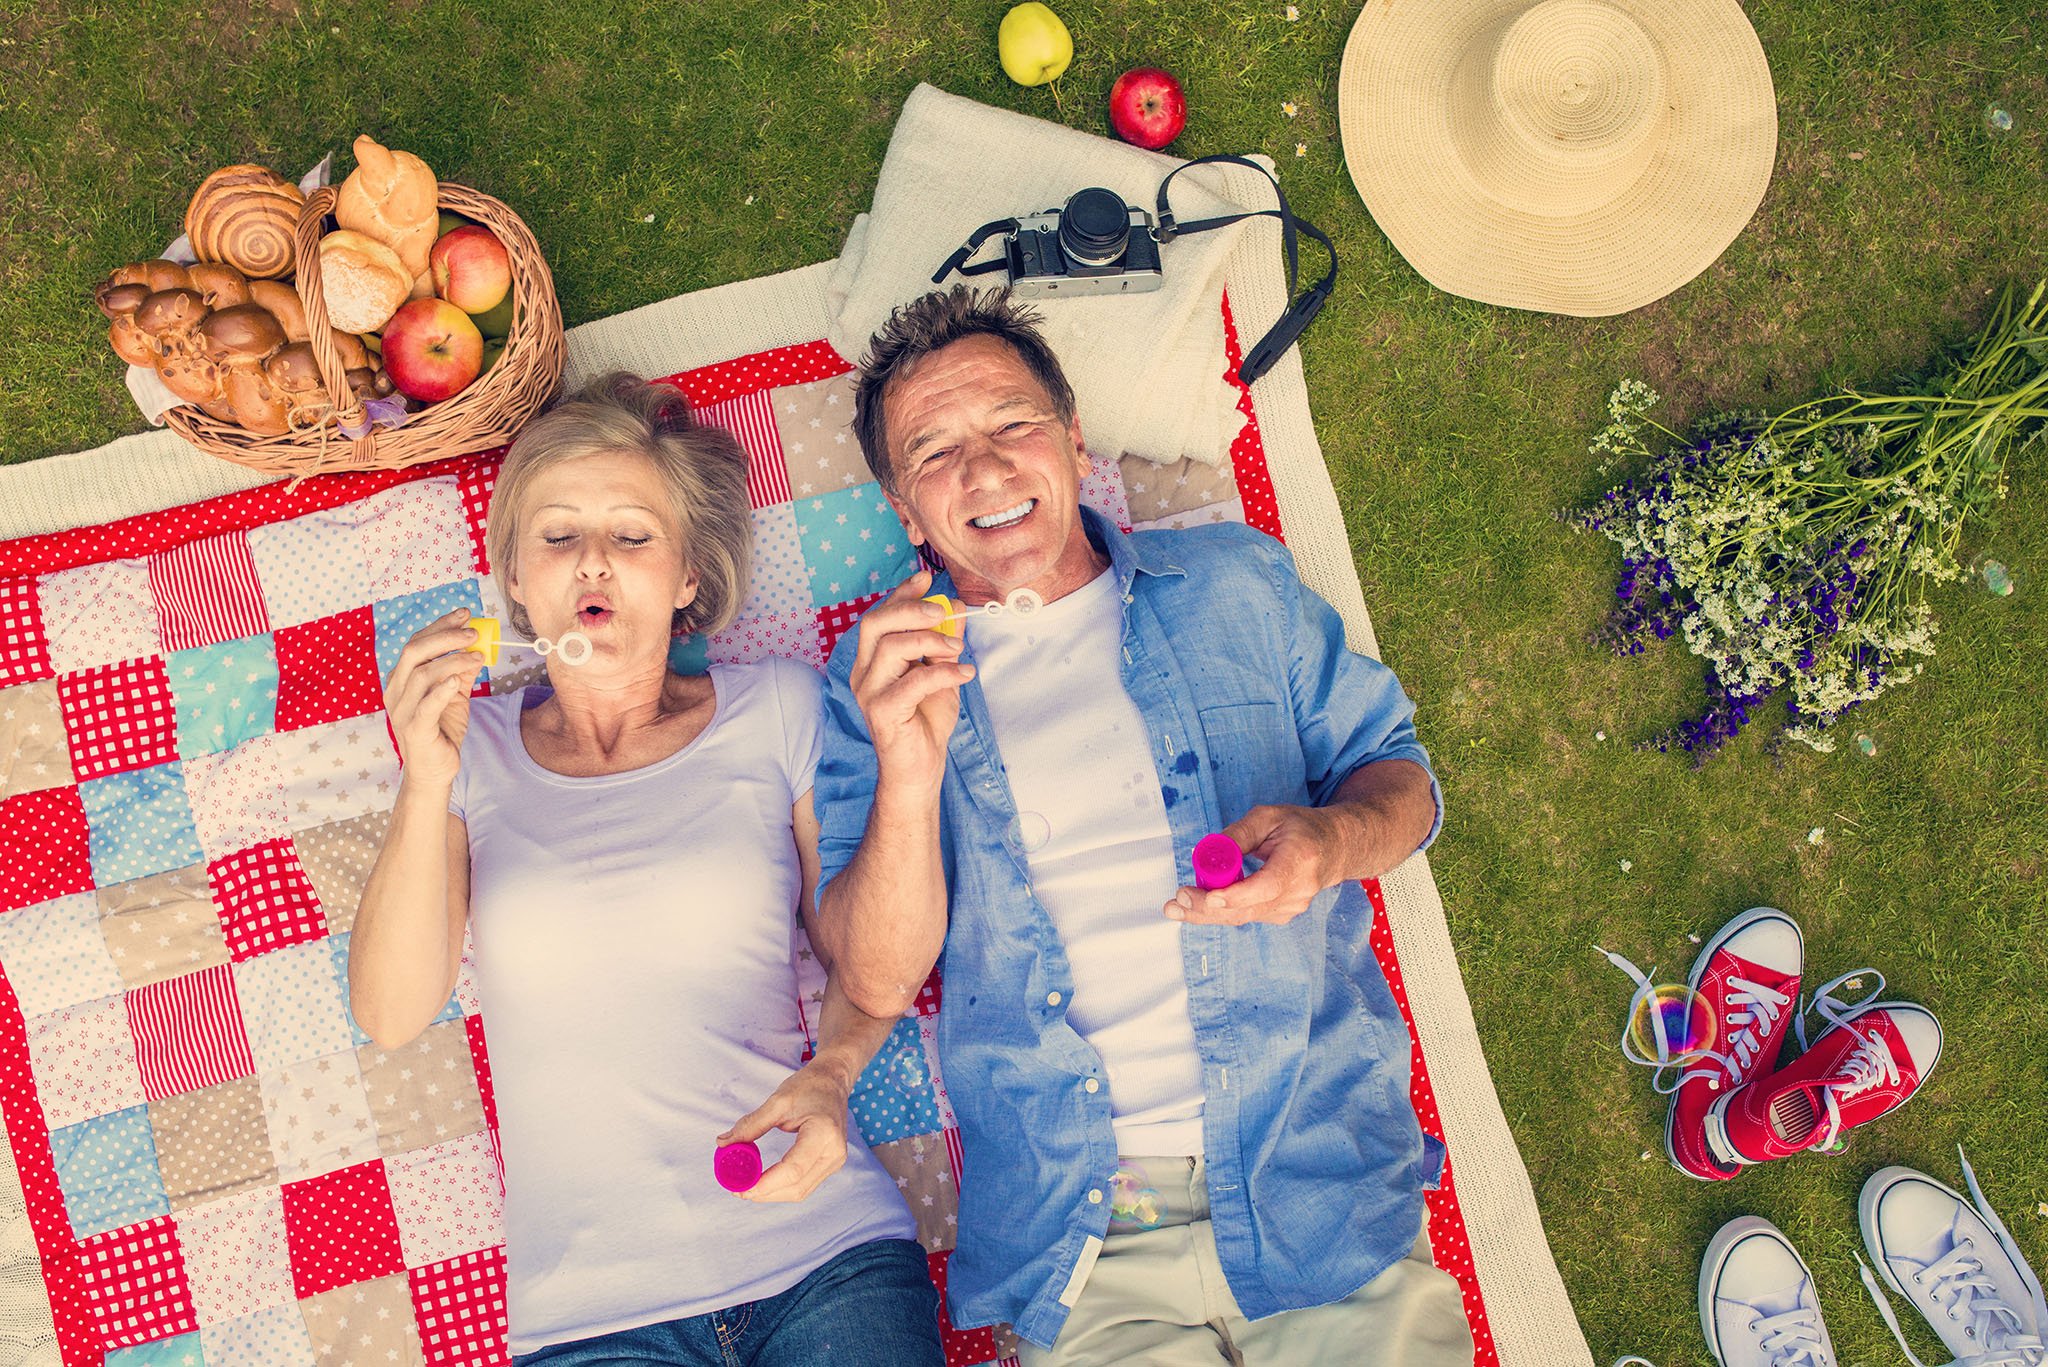 Middle-aged couple on picnic blanket blowing bubbles together